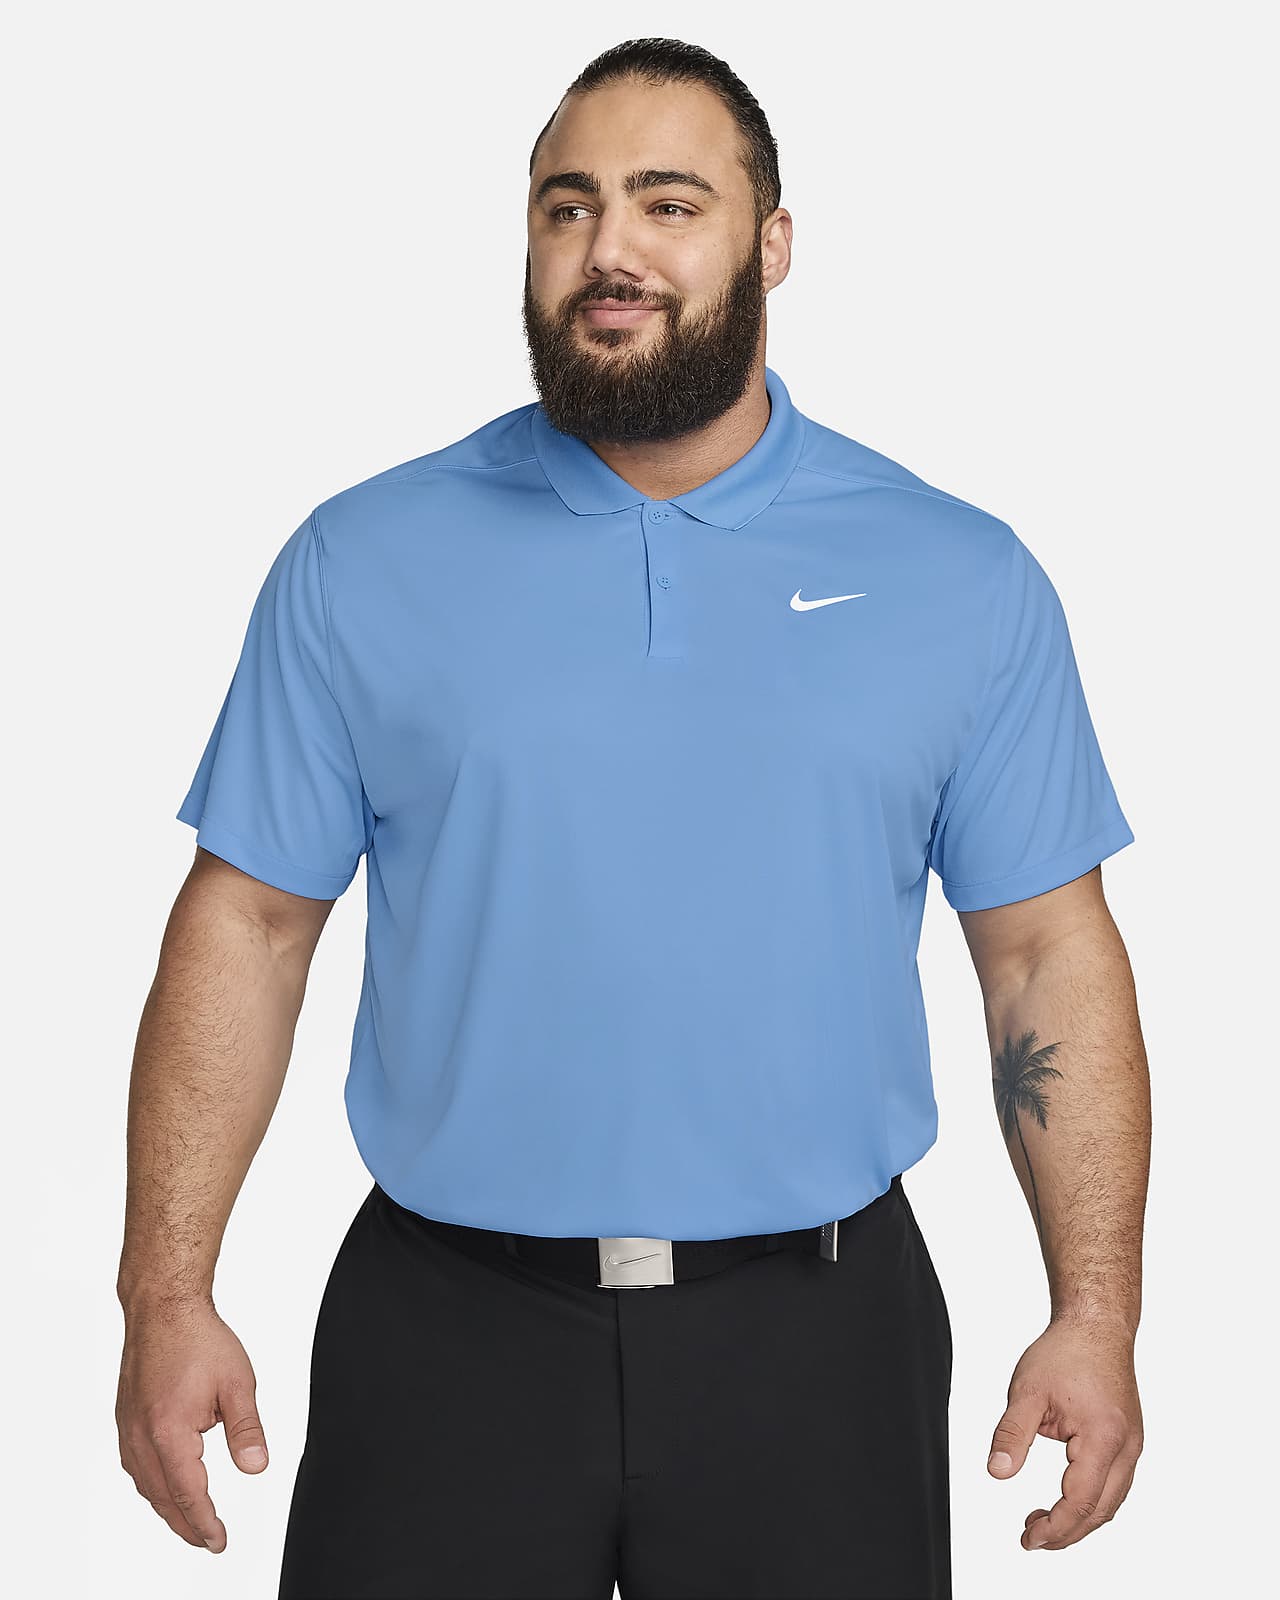 NIKE Dri-FIT Power Victory Standard Fit Mid Rise Full Length